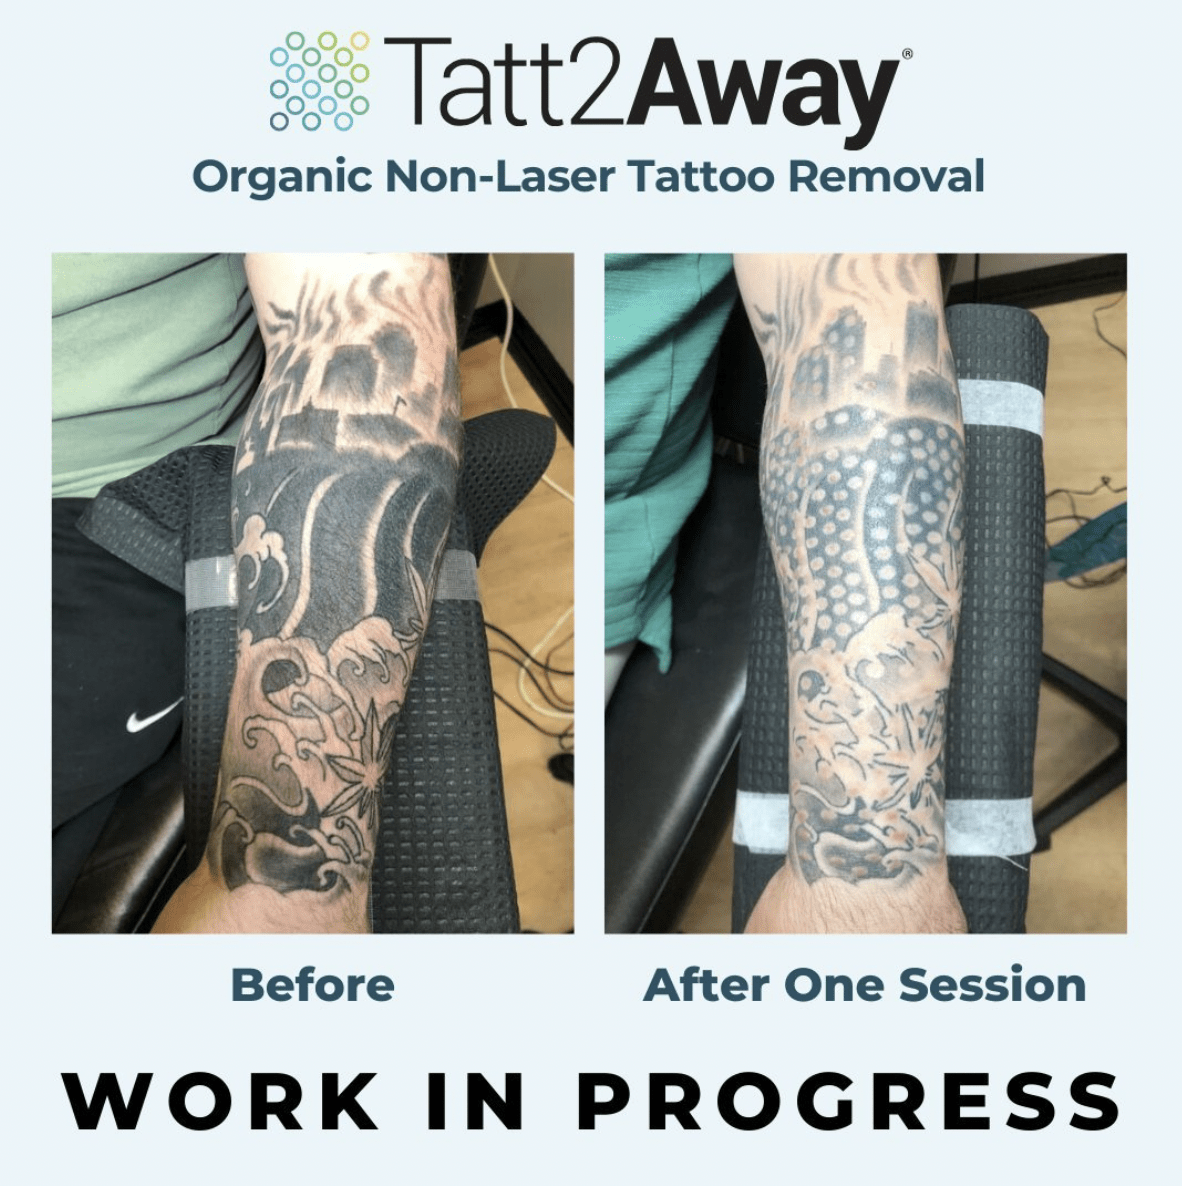 tatt2away before and after tattoo removal